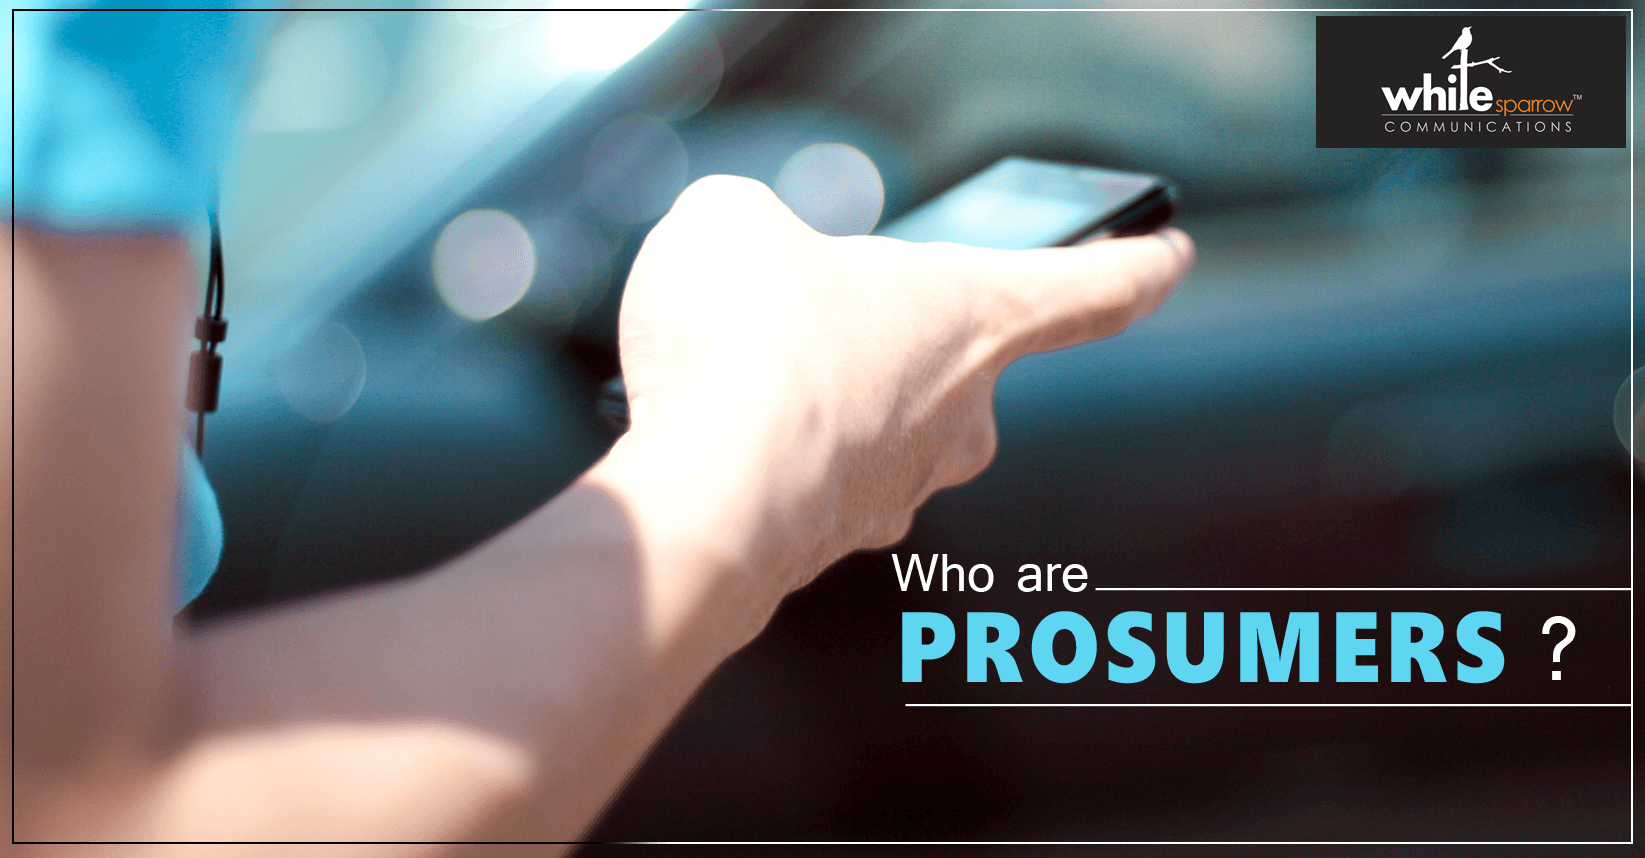 WHO ARE PROSUMERS ?